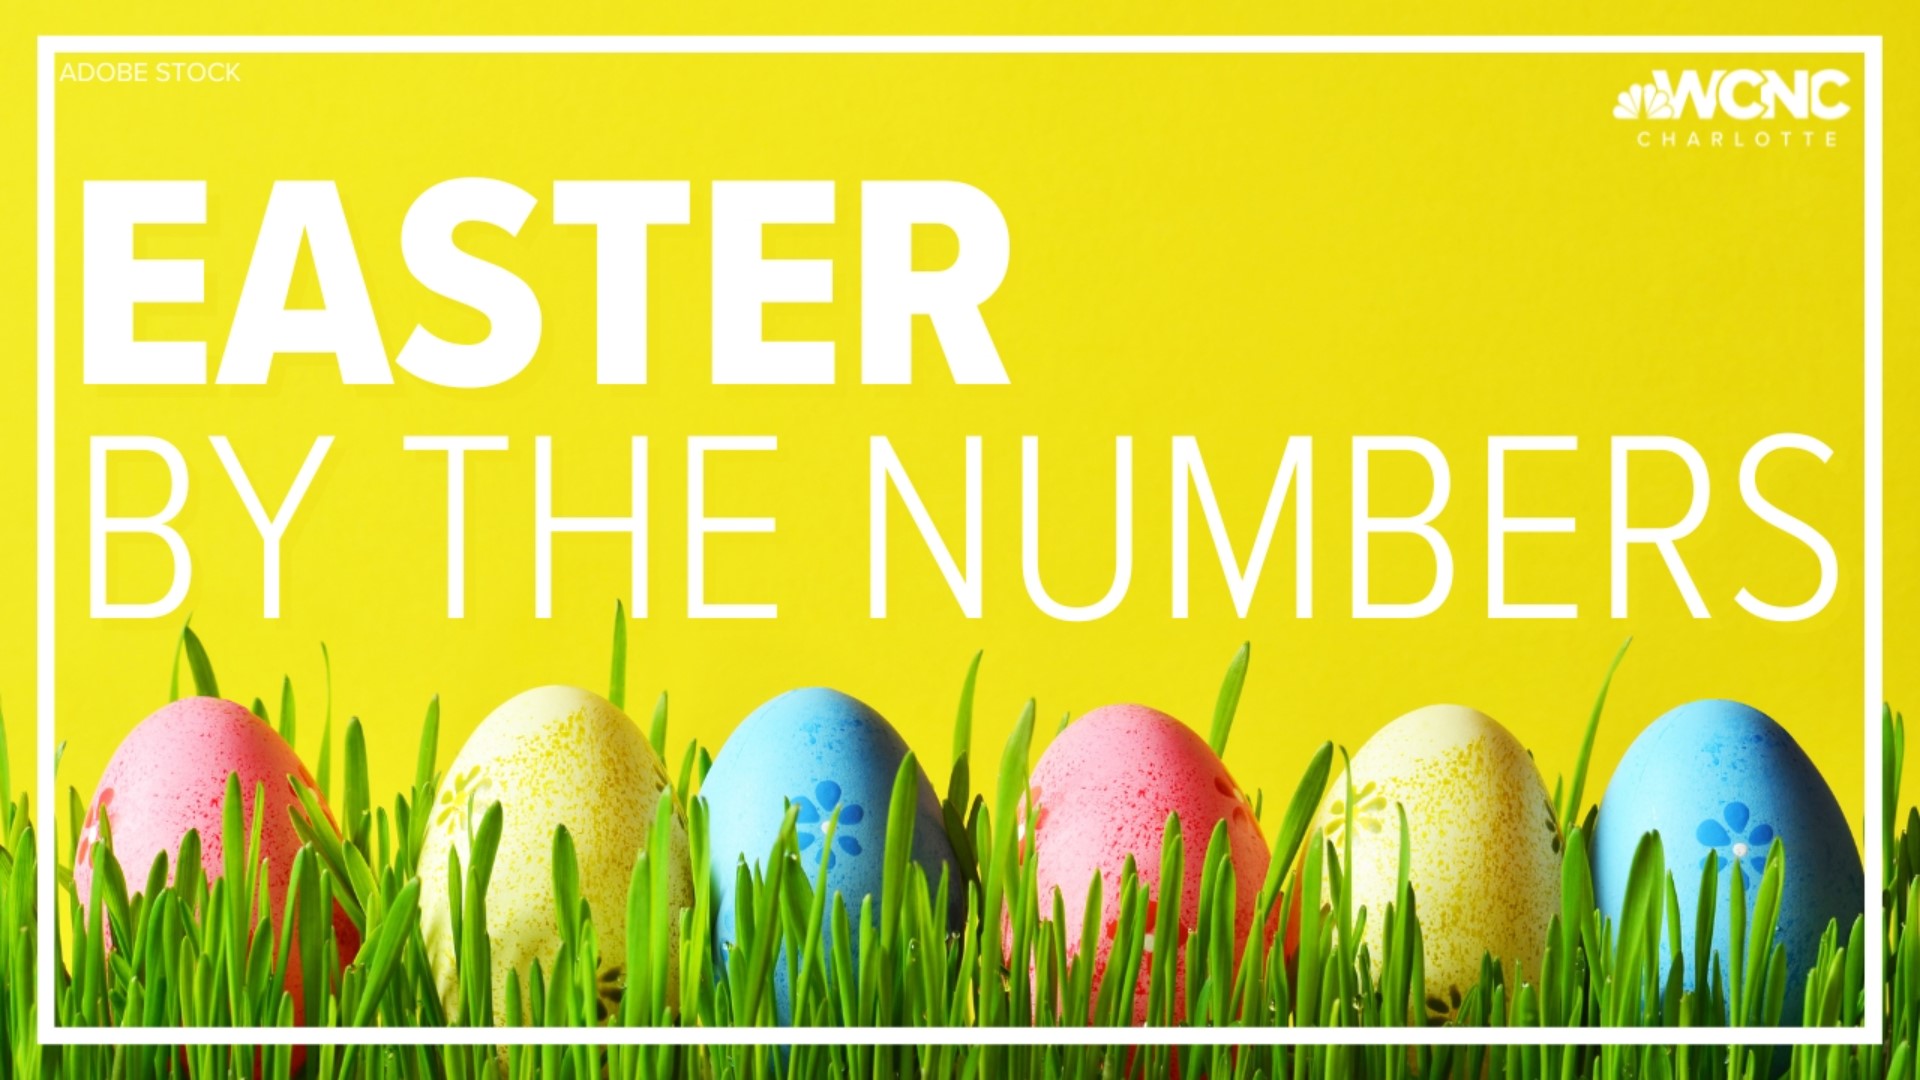 According to Wallet Hub, $24 billion will be spent this year on the Easter holiday.